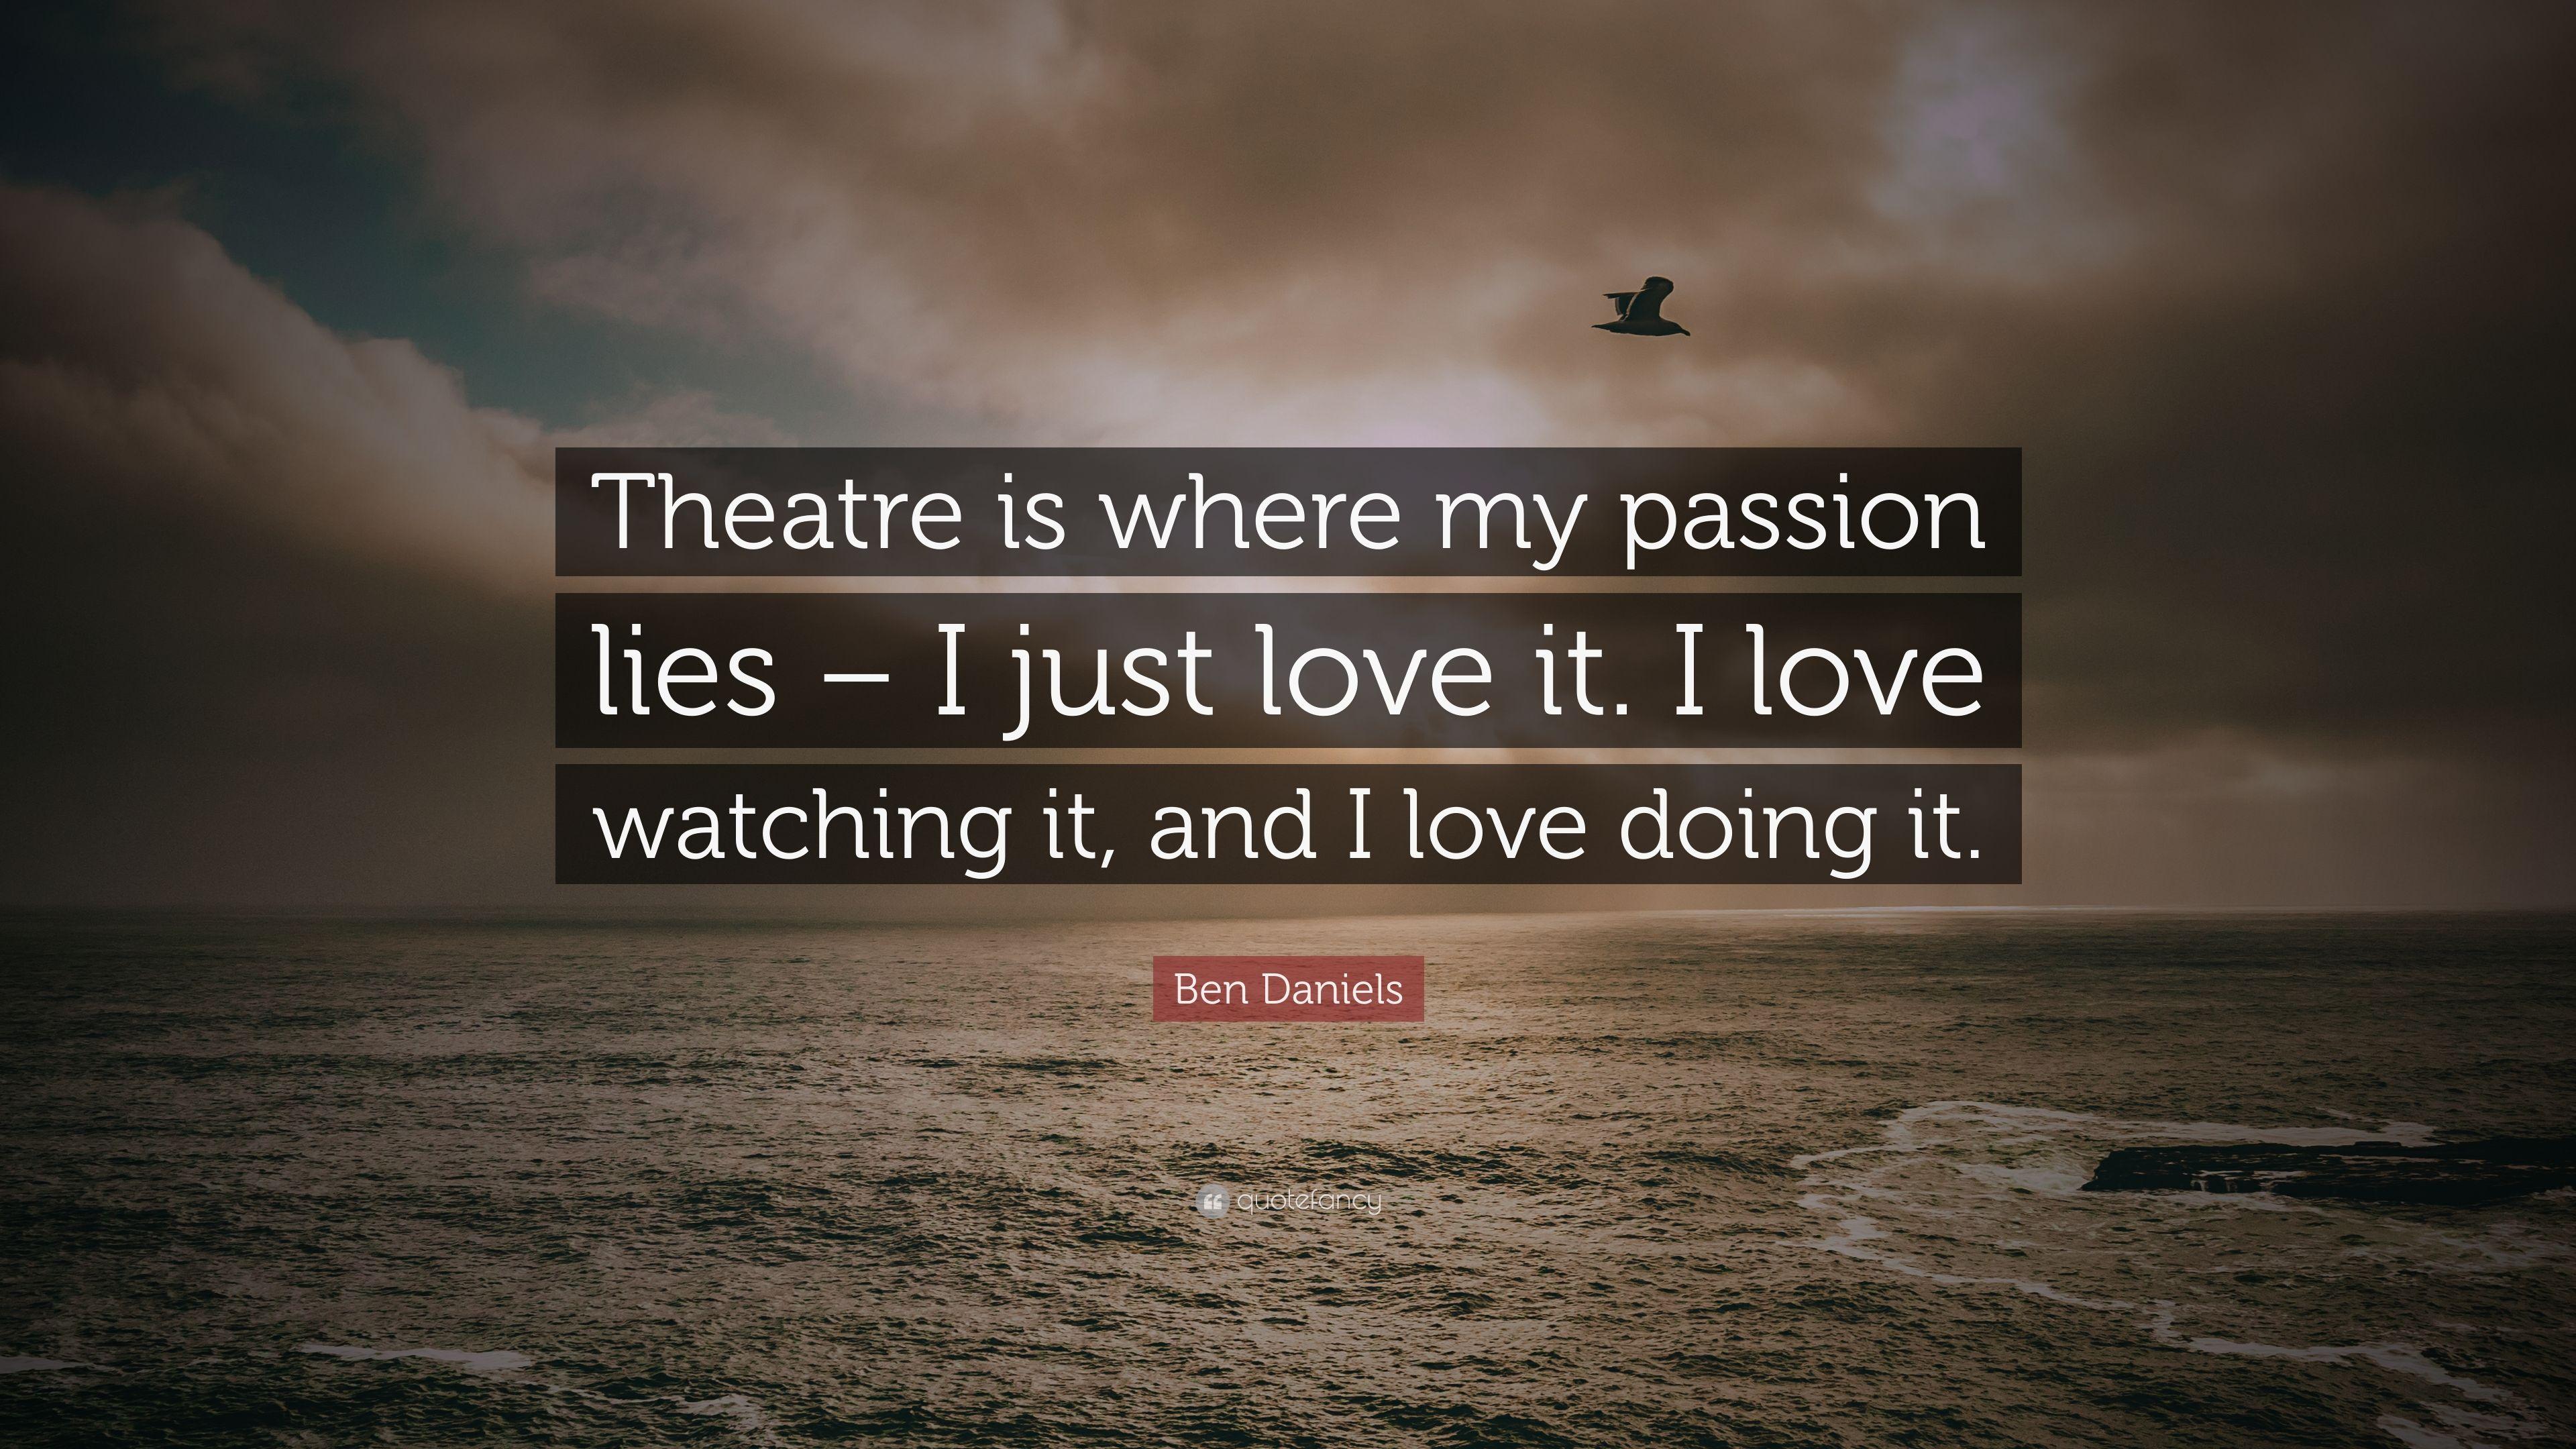 Ben Daniels Quote: "Theatre is where my passion lies - I just love 